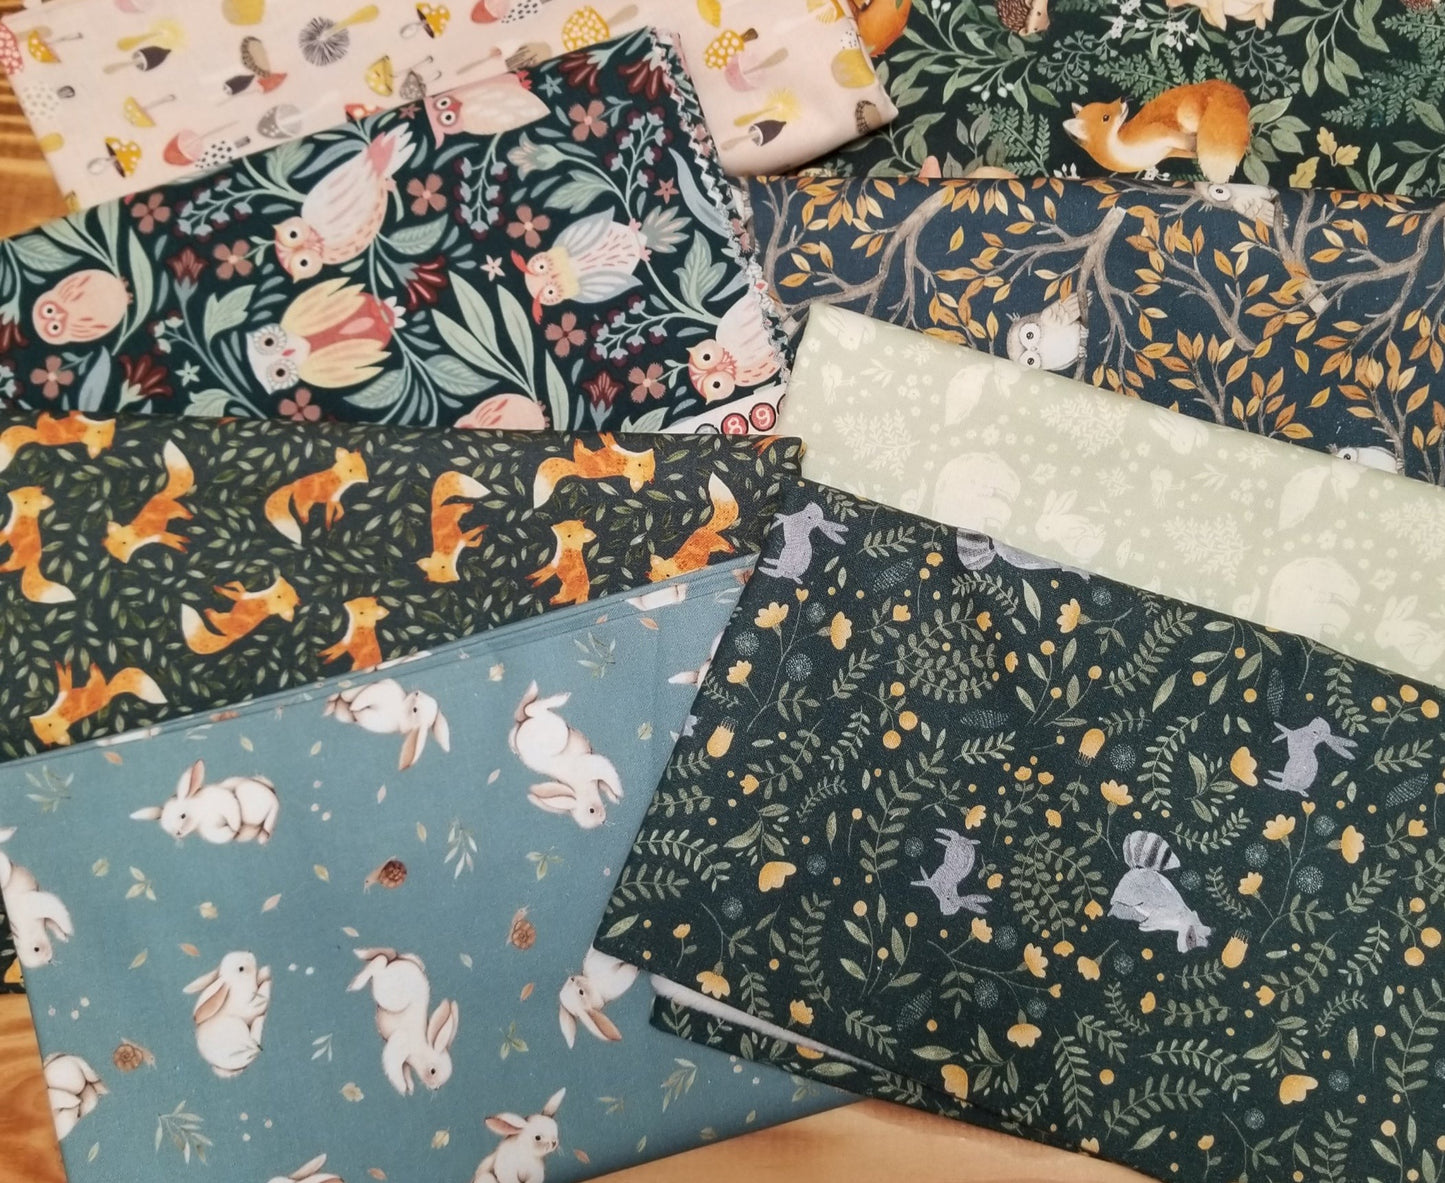 End of Bolt 8 yard case pack: 8 pieces of Quilting Cottons Dear Stella  ( 1 yard cuts)- As pictured